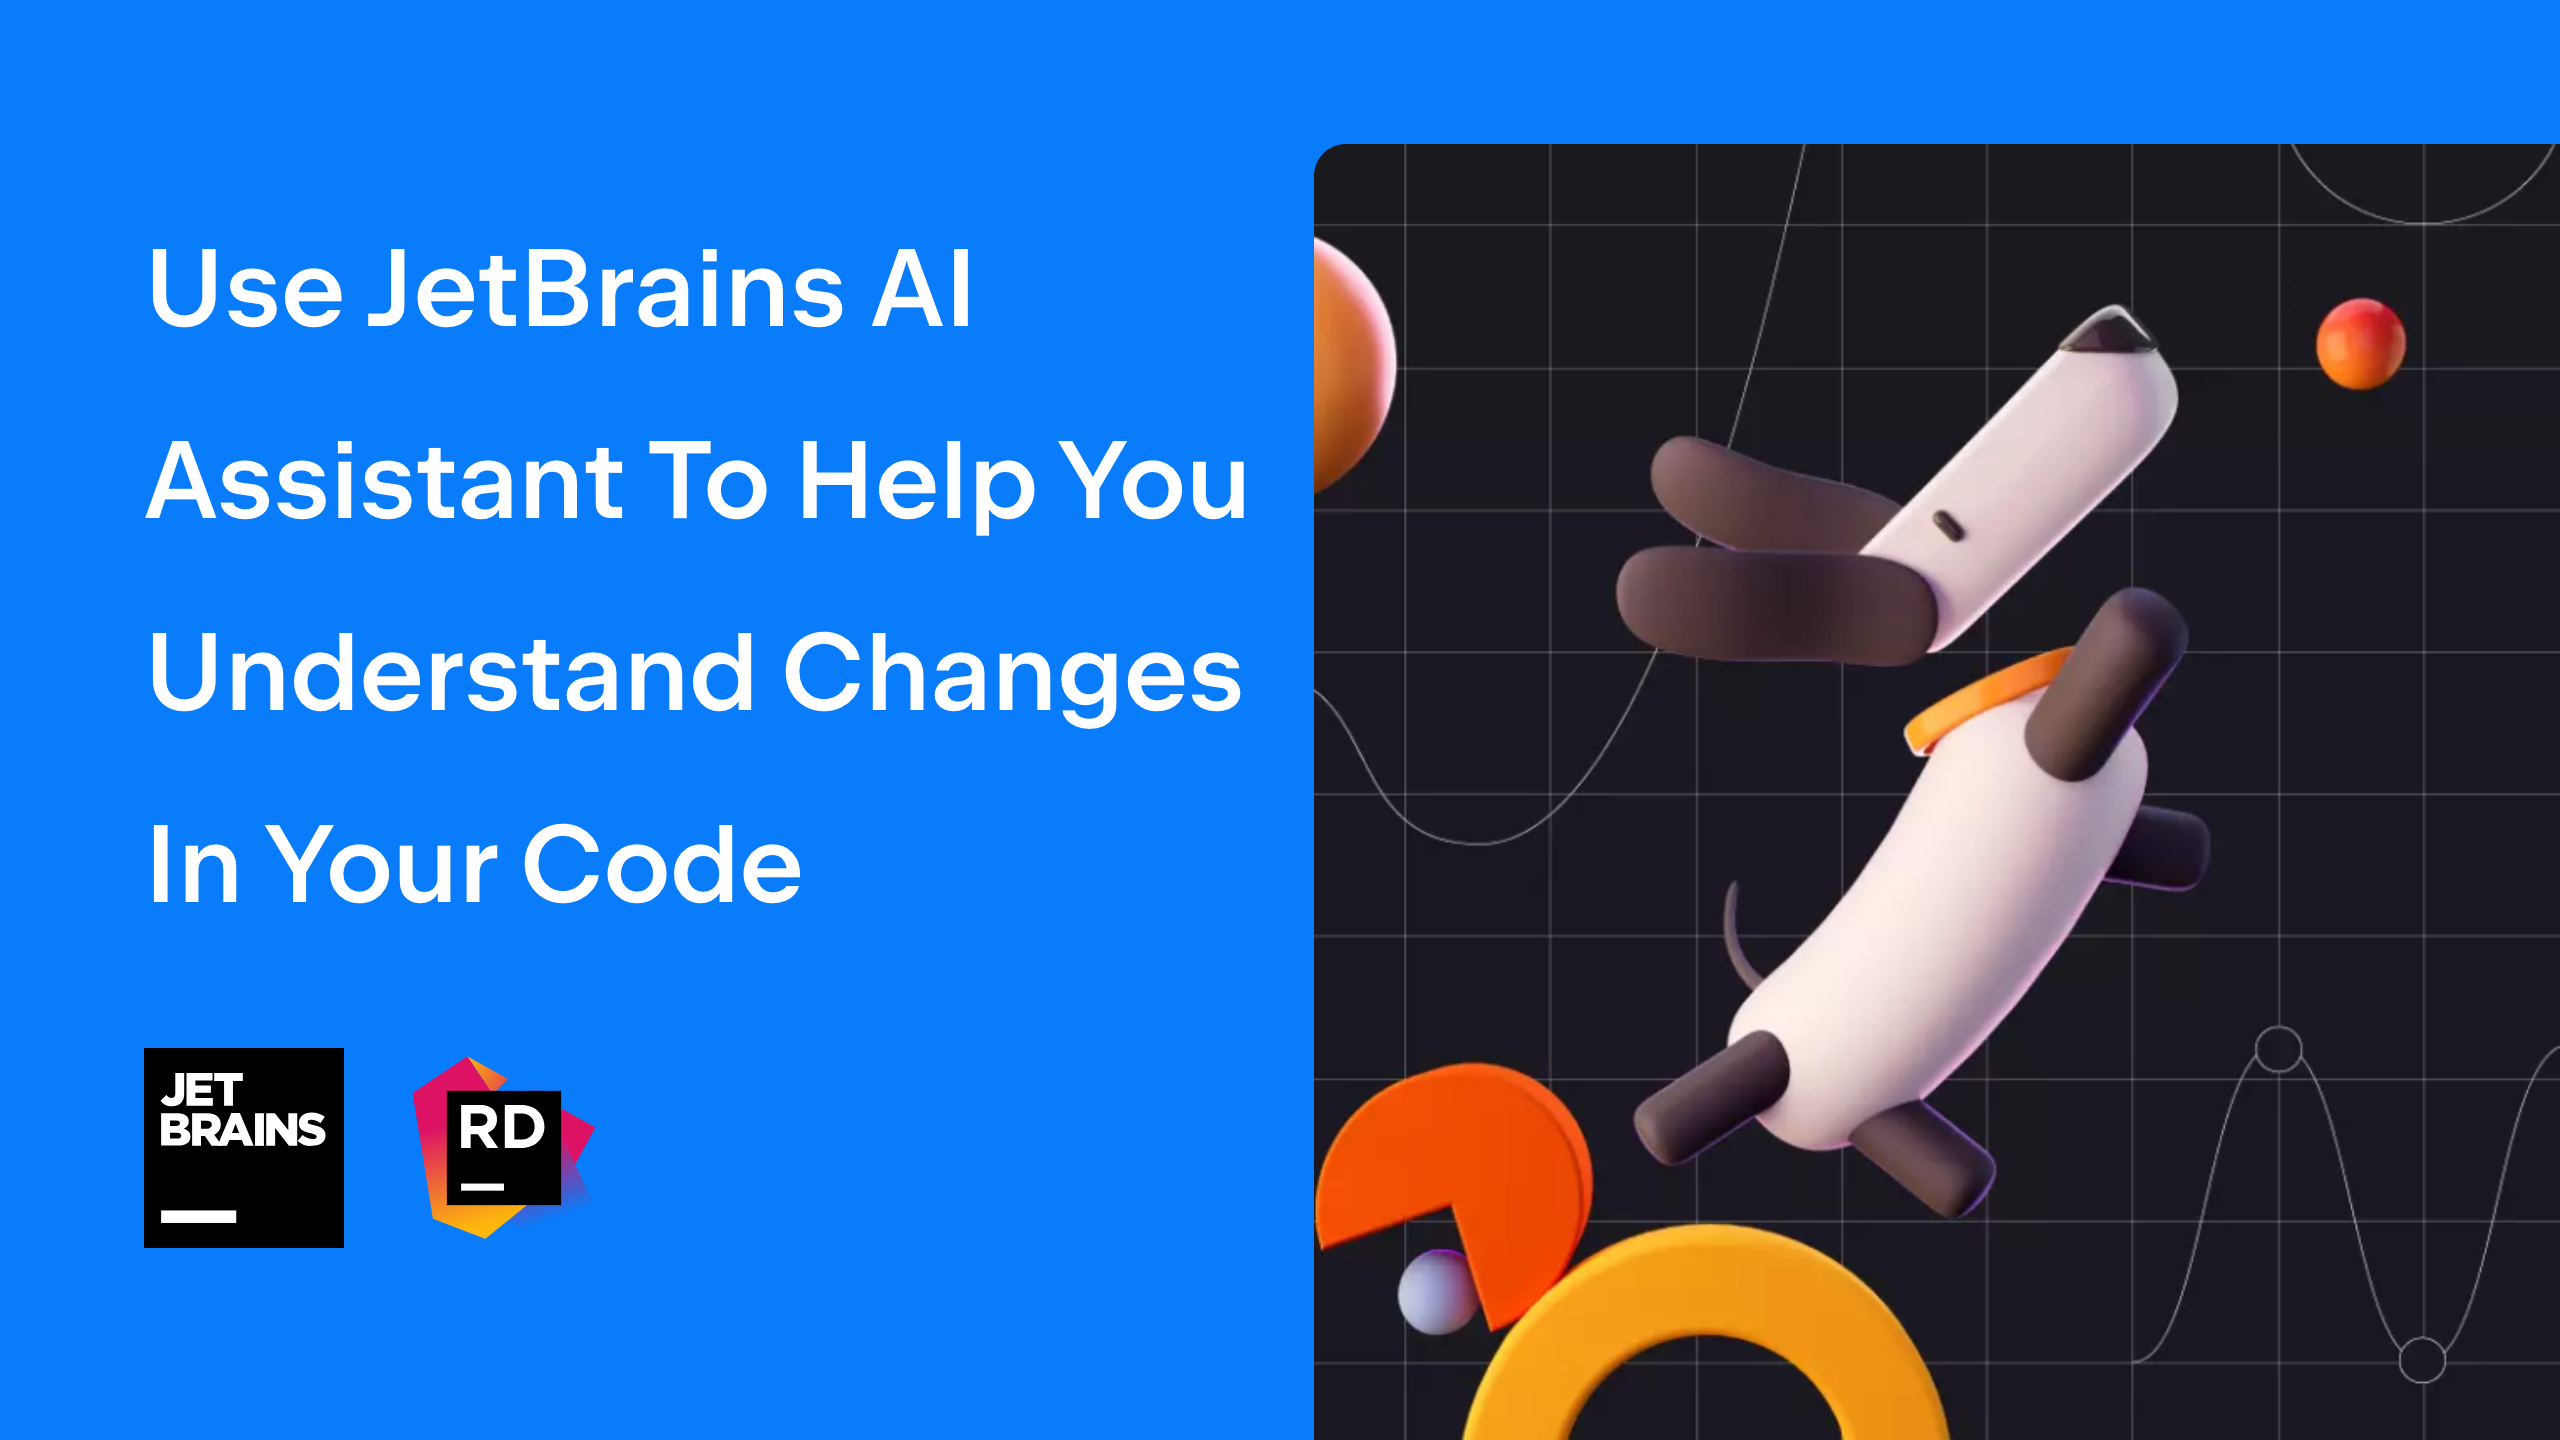 Use JetBrains AI Assistant To Help You Understand Changes In Your Code | The .NET Tools Blog